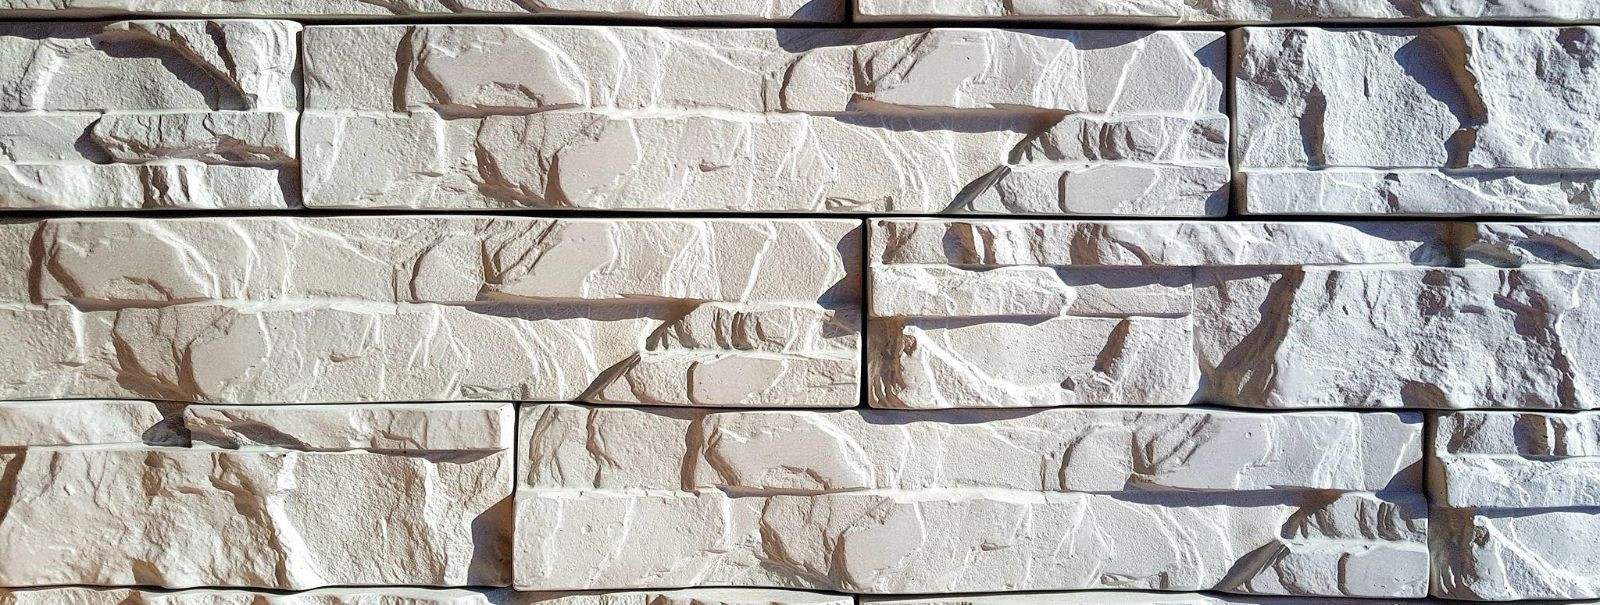 Facade stones serve as the skin of a building, not only providing structural support but also defining its aesthetic character. Customized facade stones elevate